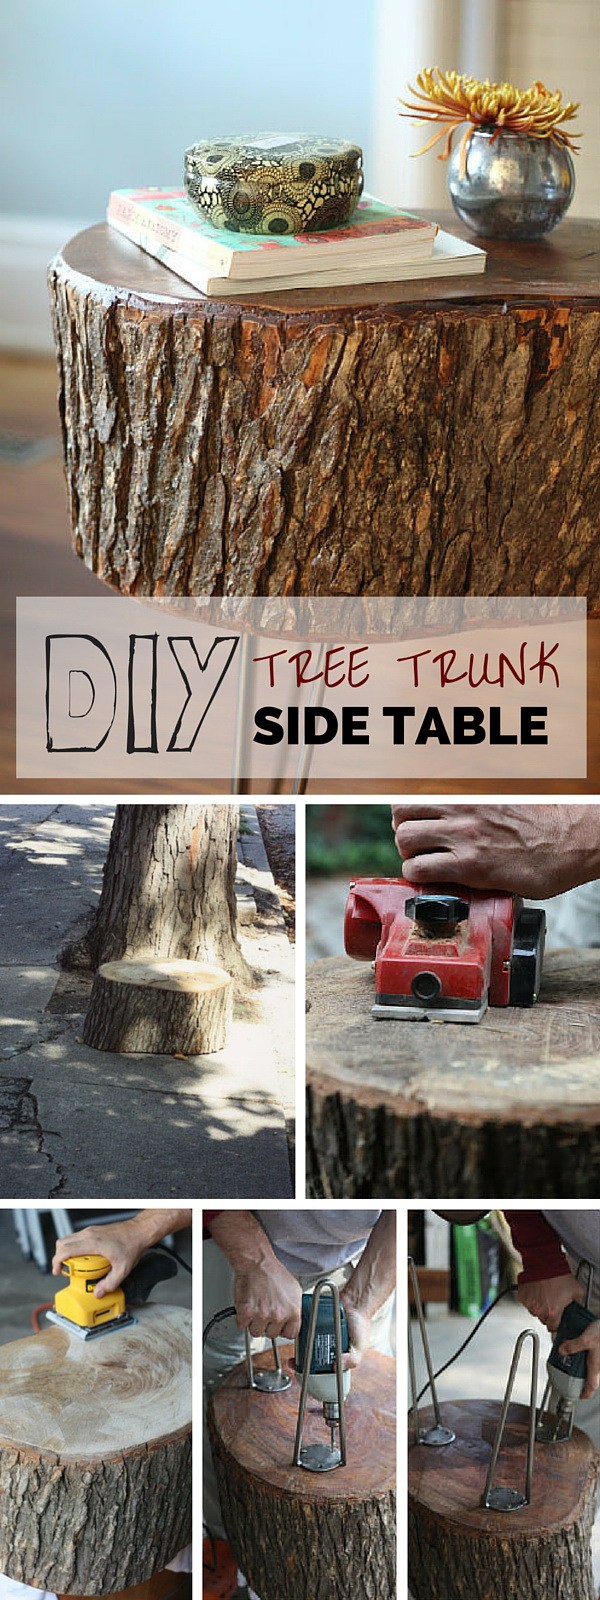 Tree Trunk Side Table: Tree trunk furniture is a trendy rustic accent in many interior design styles.